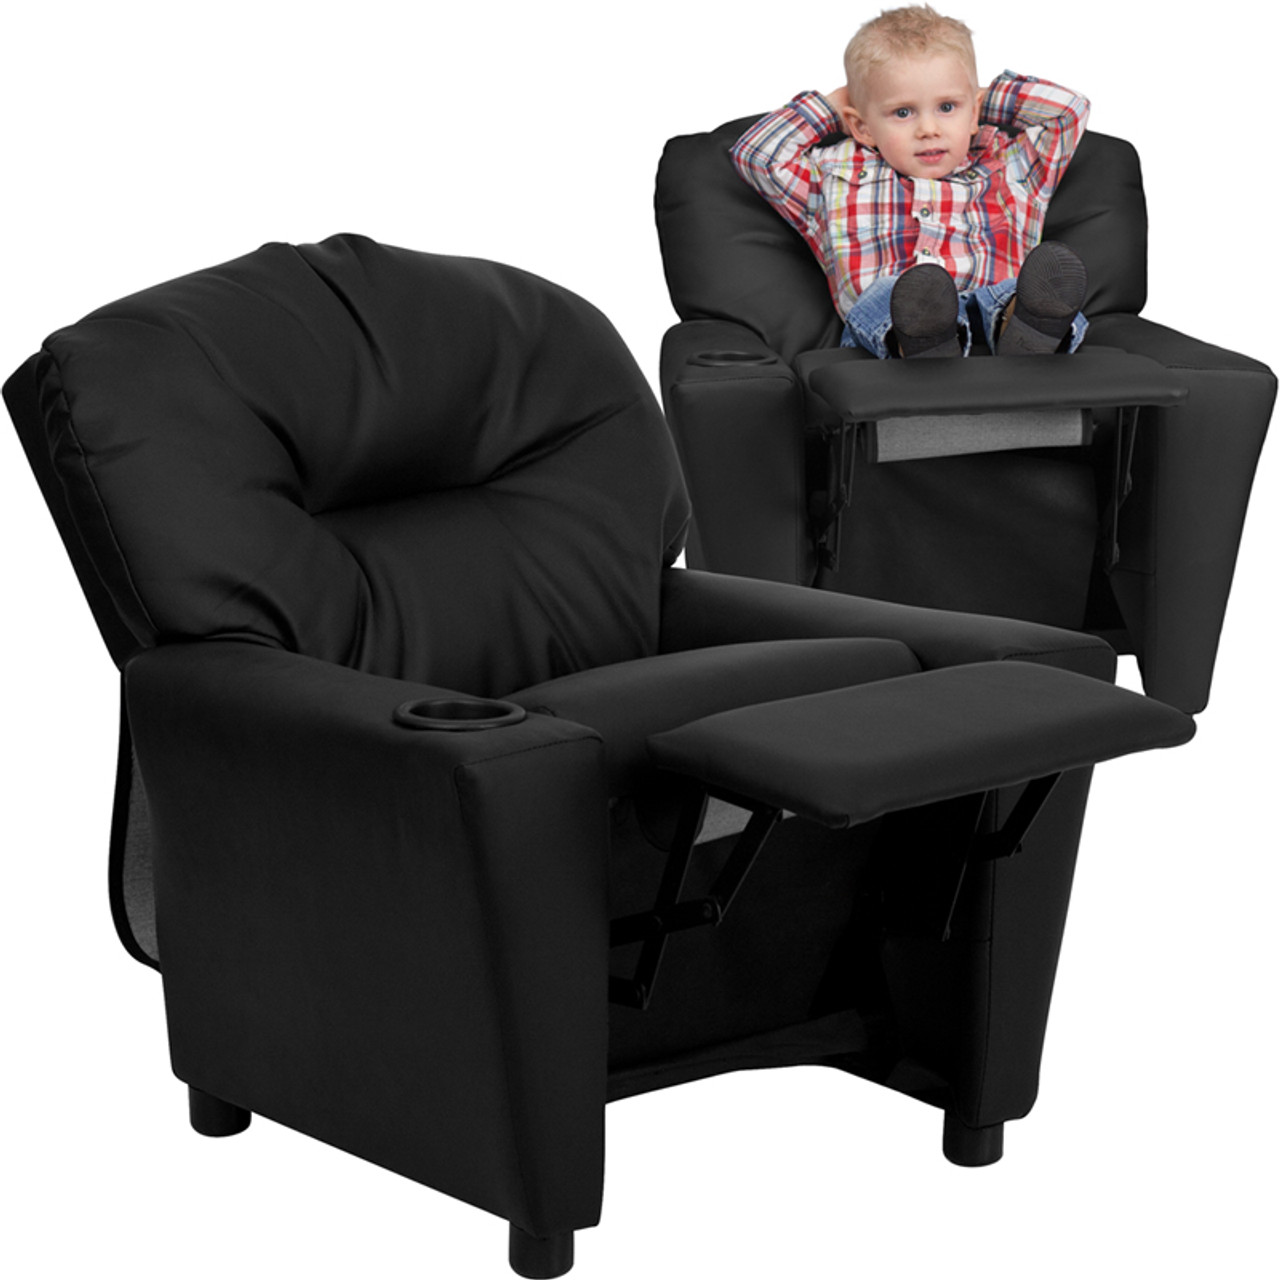 Choosing the Right Child Recliner for Your Home插图4